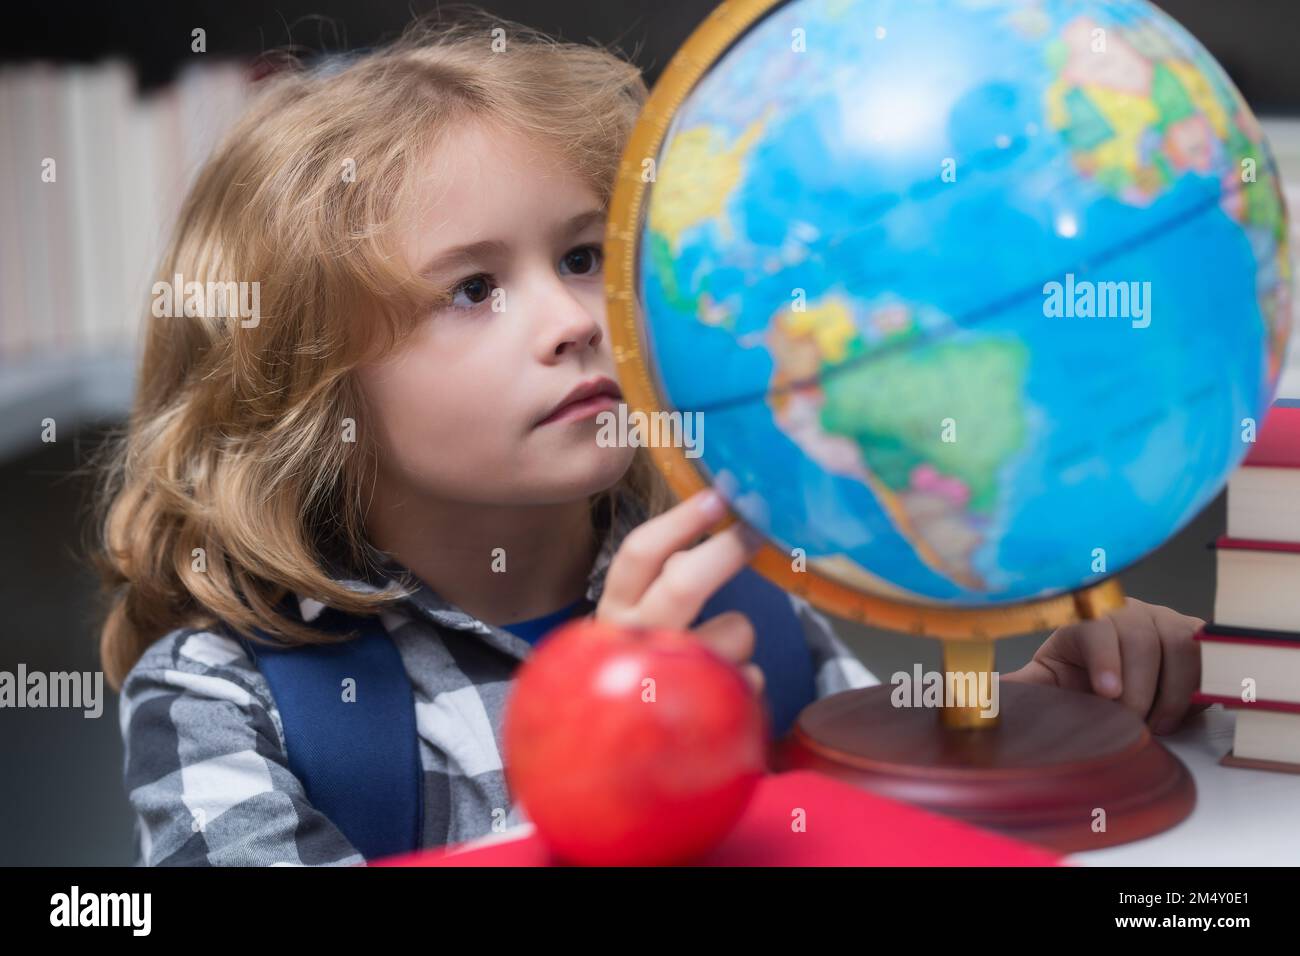 School kid student learning, study language or literature at school. Elementary school child. Portrait of nerd pupil studying. Stock Photo